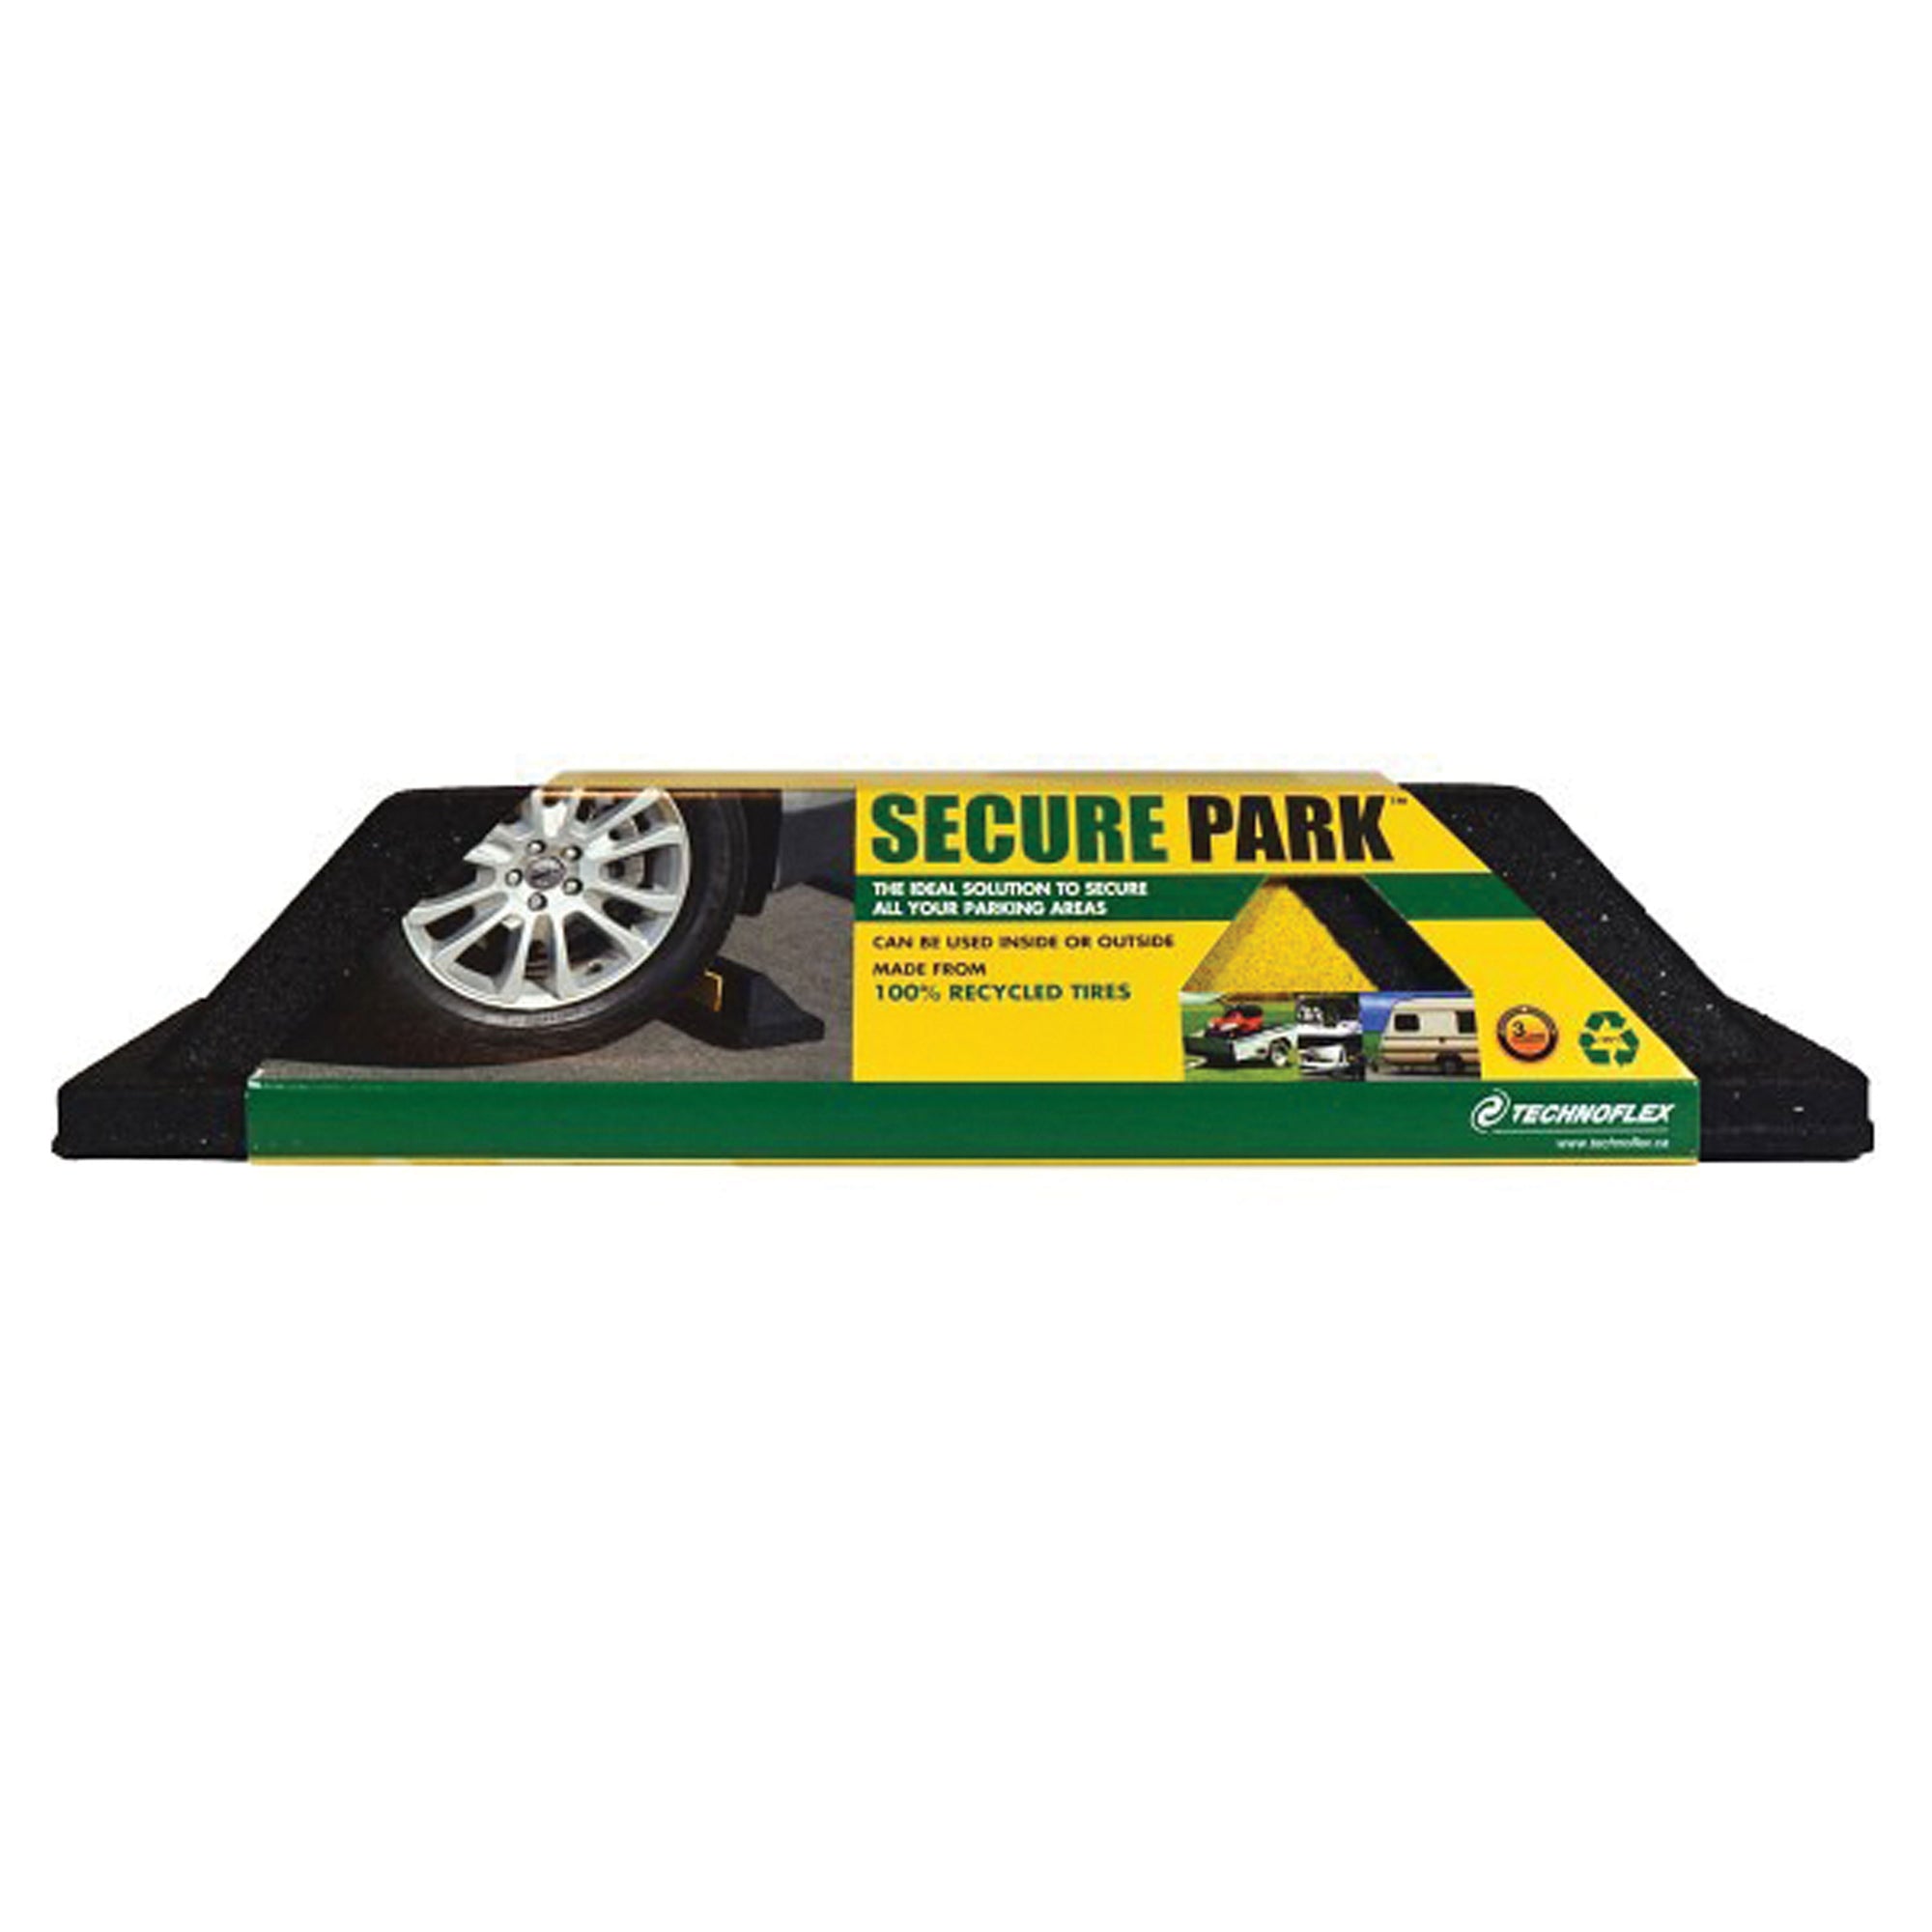 Technoflex PC20Y SECURE PARK I Parking Curb - 20 in. L x 6 in. W x 4.5 in. H